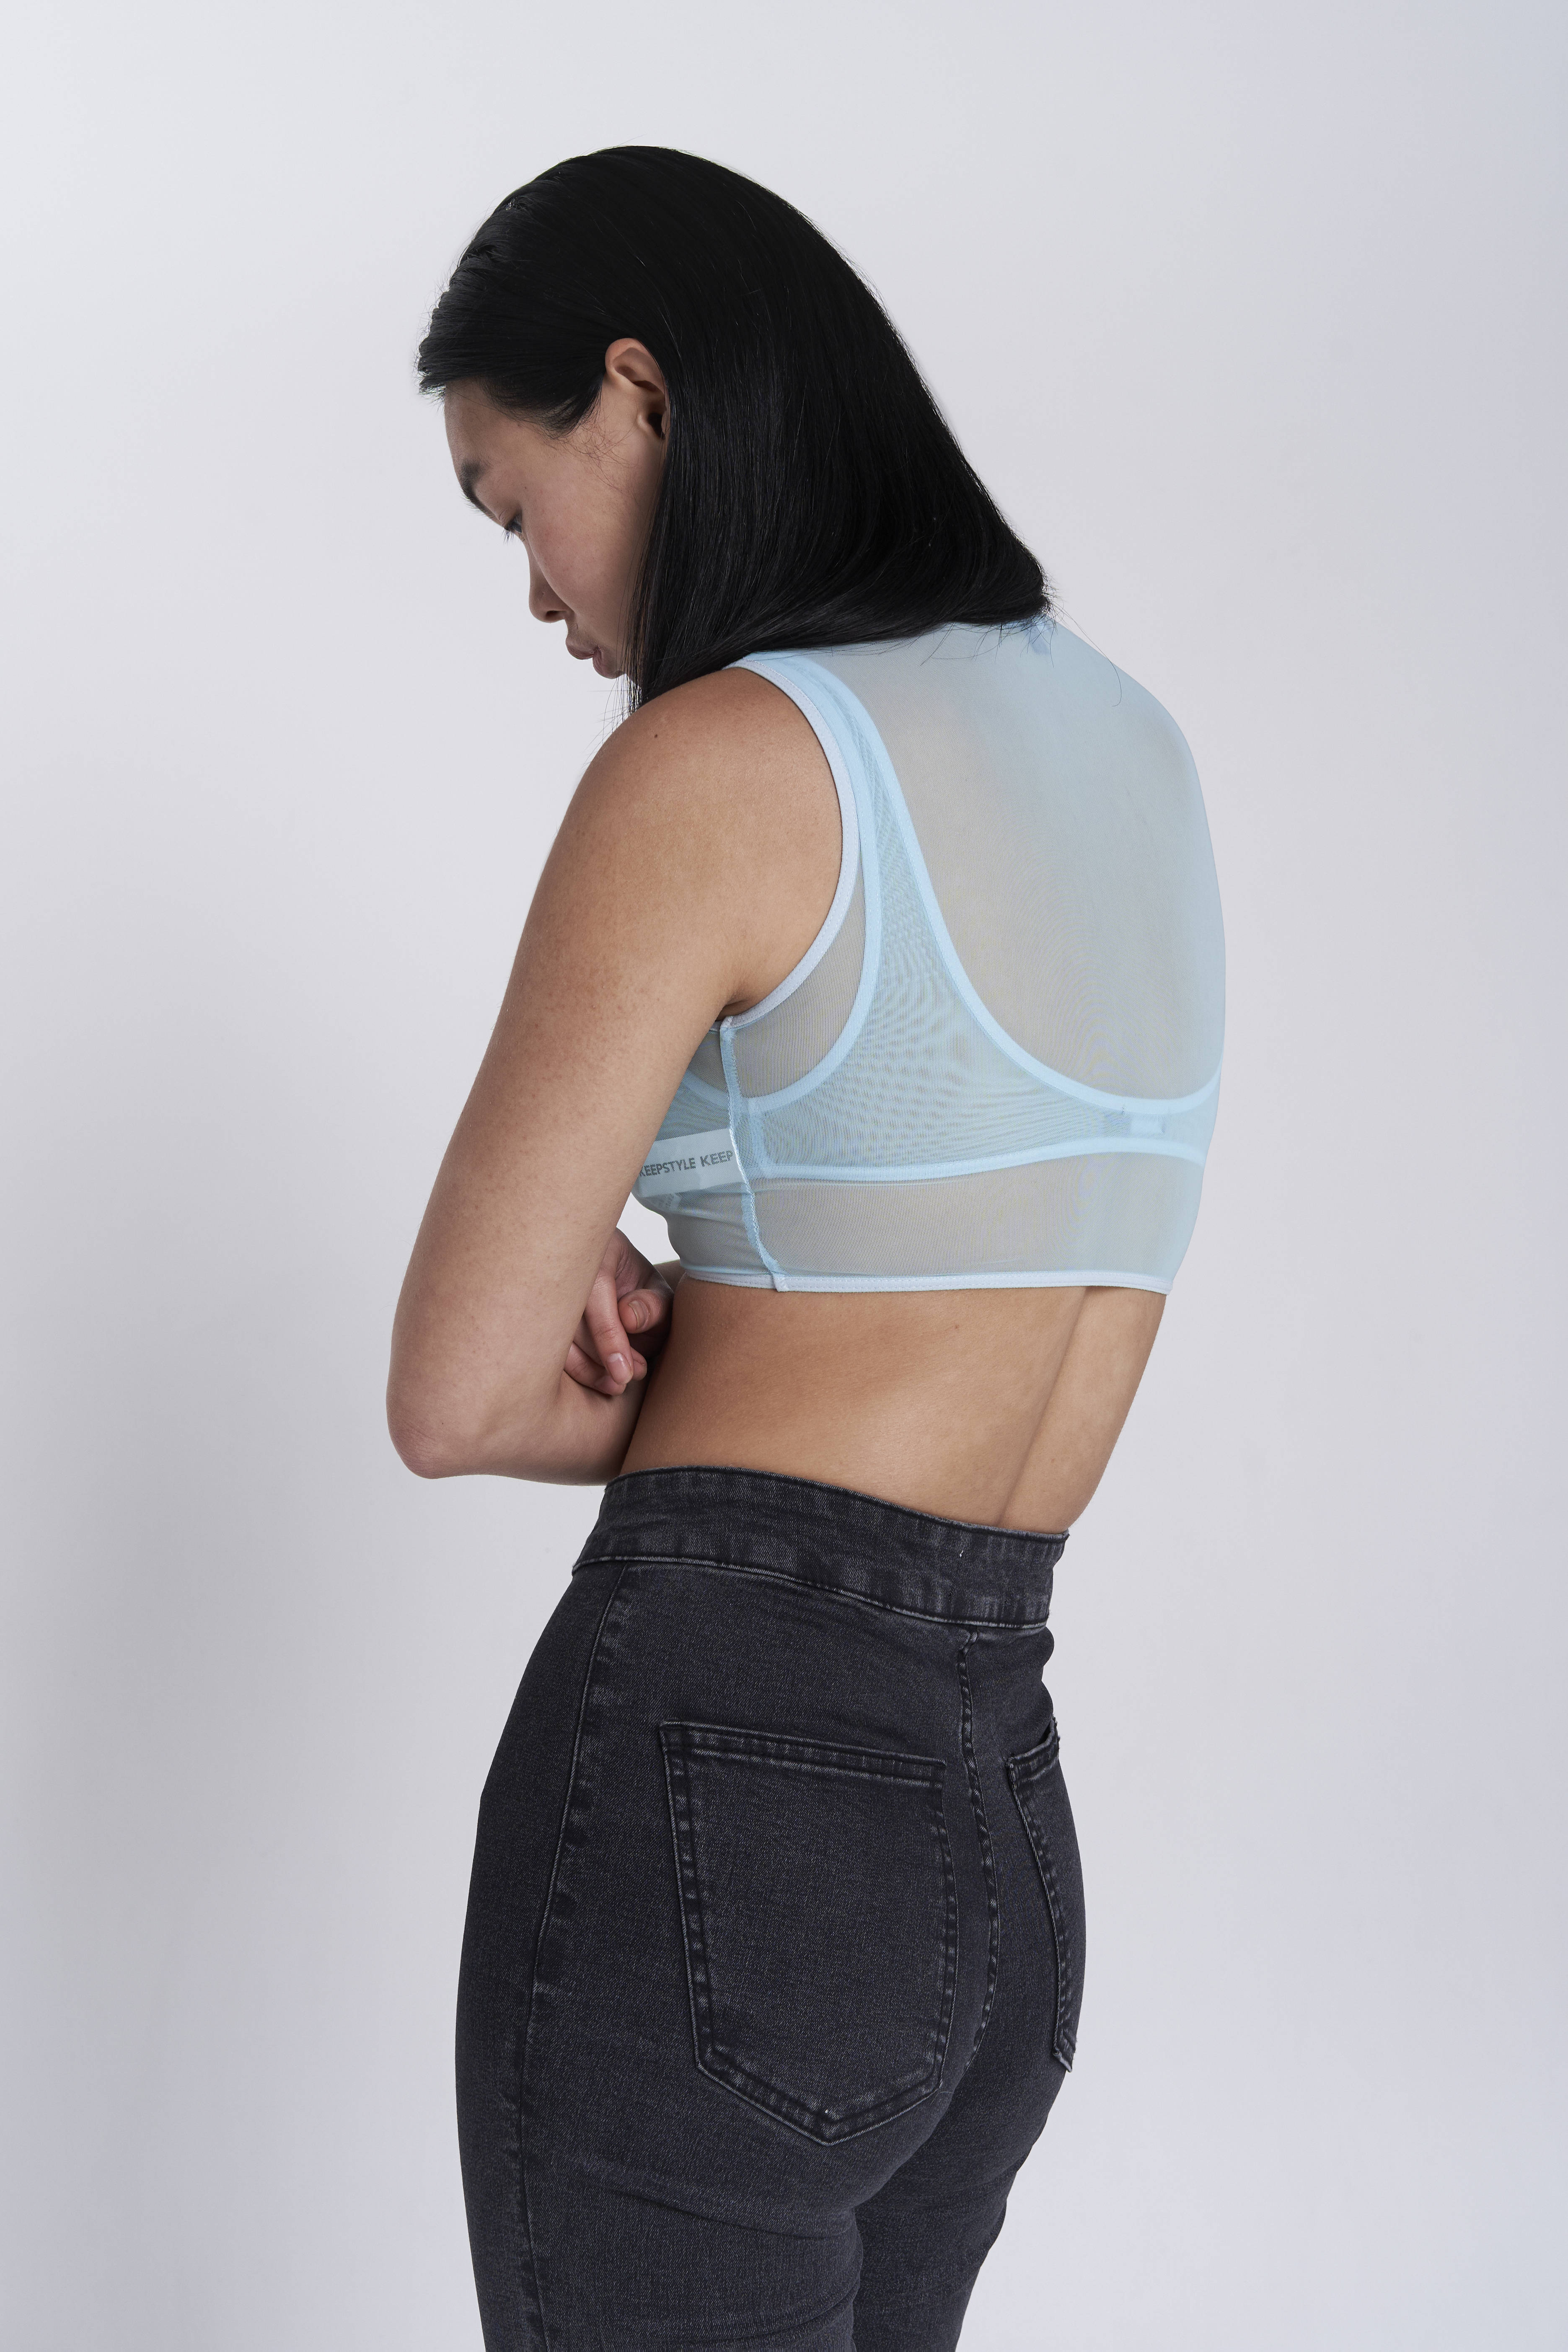 double top mesh in blue color